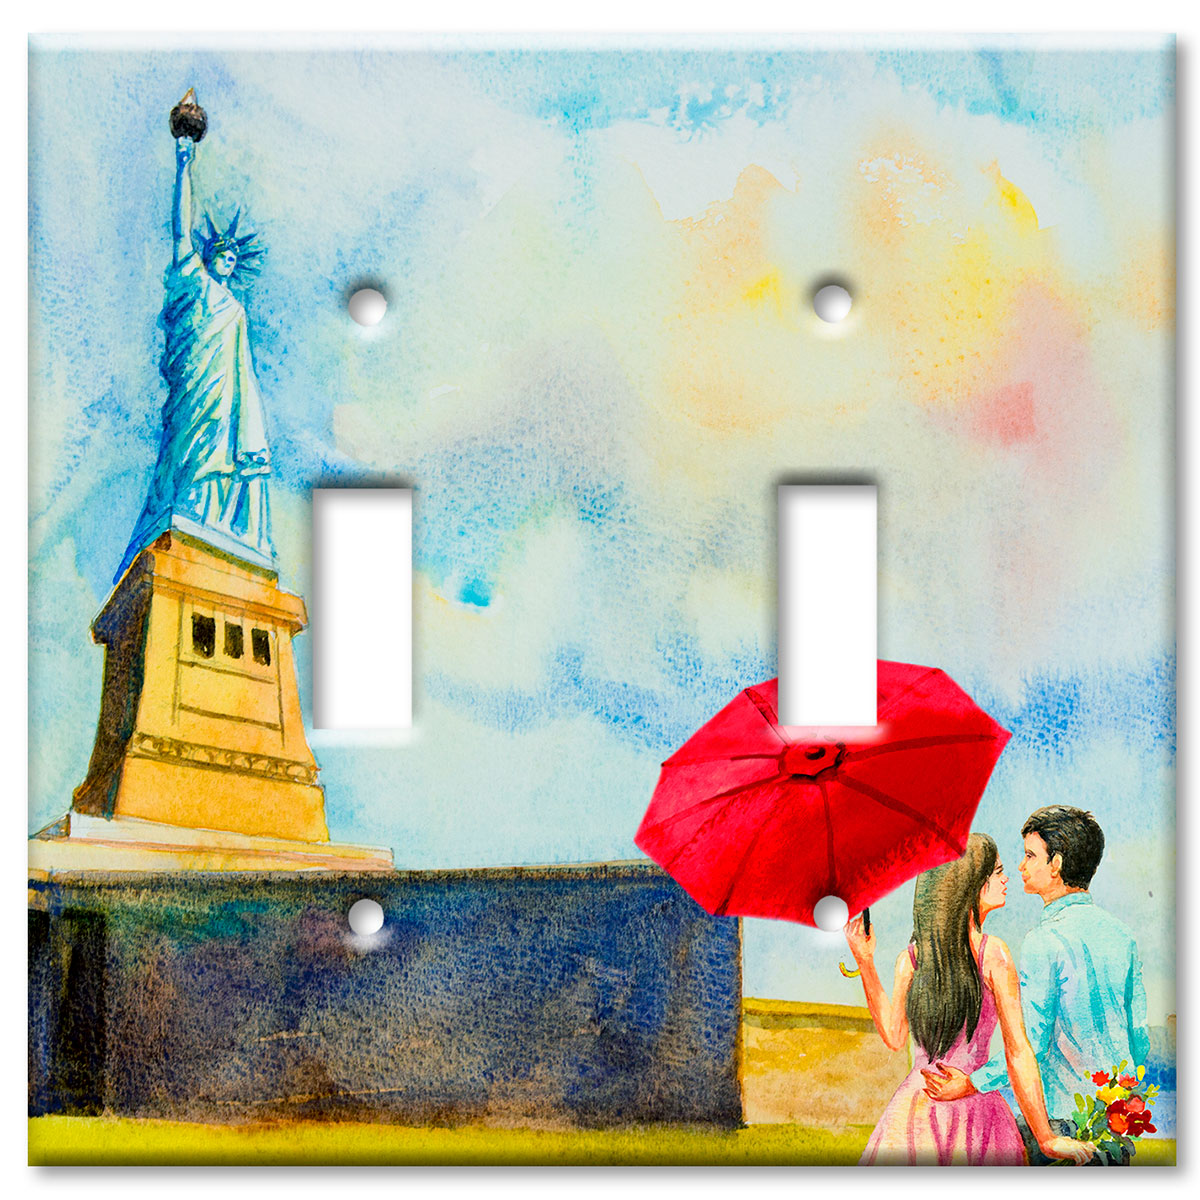 Art Plates - Decorative OVERSIZED Switch Plate - Outlet Cover - Statue of Liberty Painting